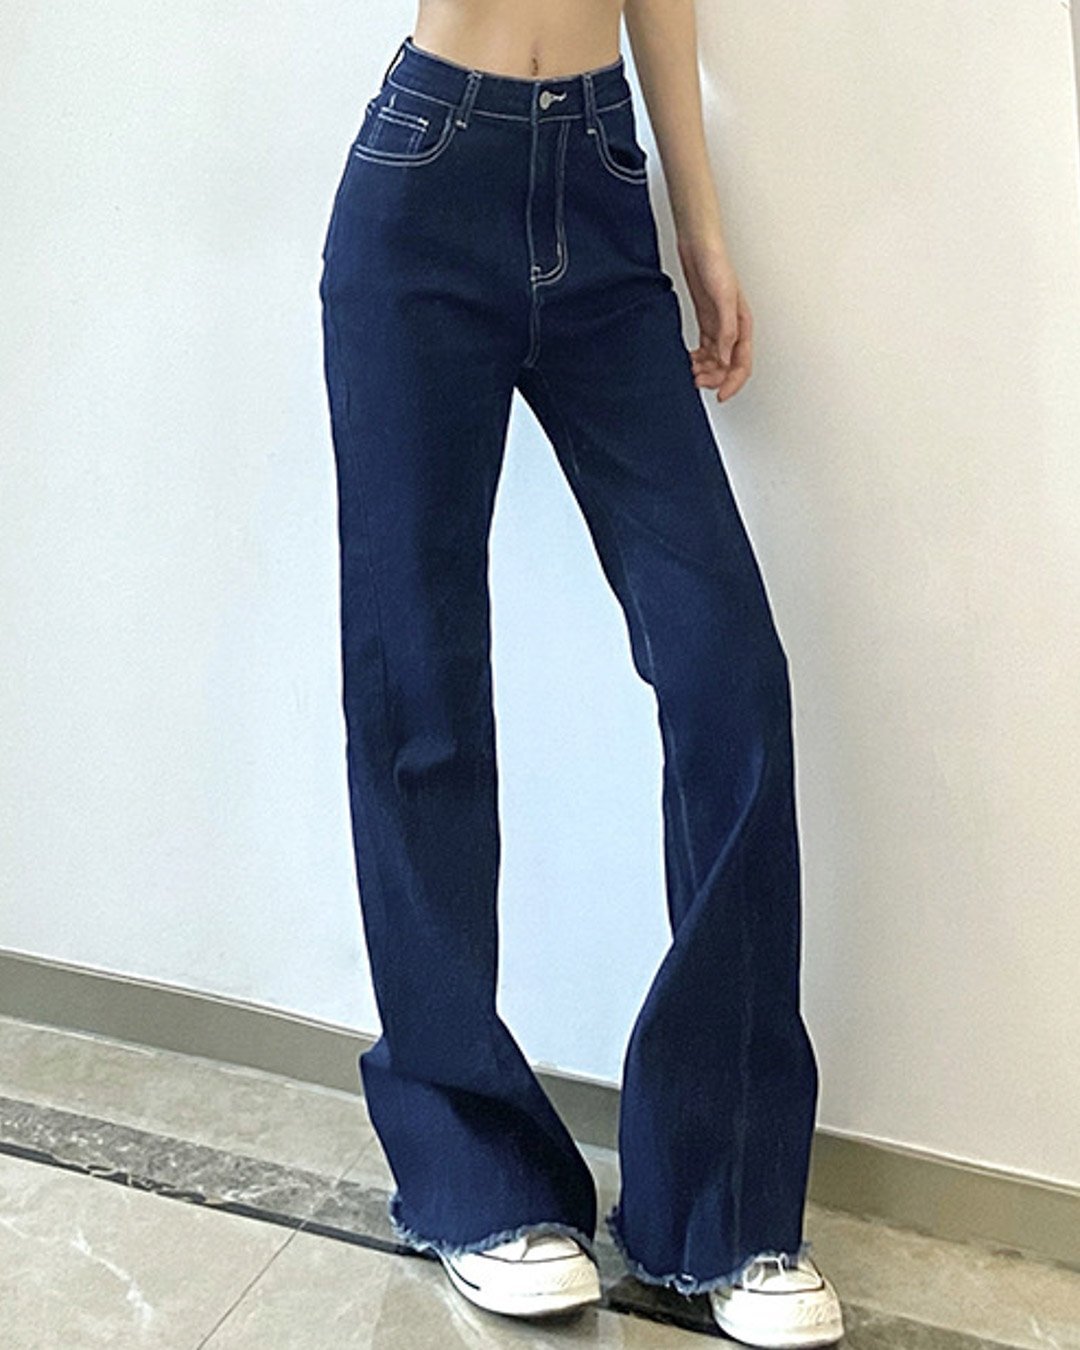 Fashionv-Casual Stretch Women's Straight Fit Flared Jeans